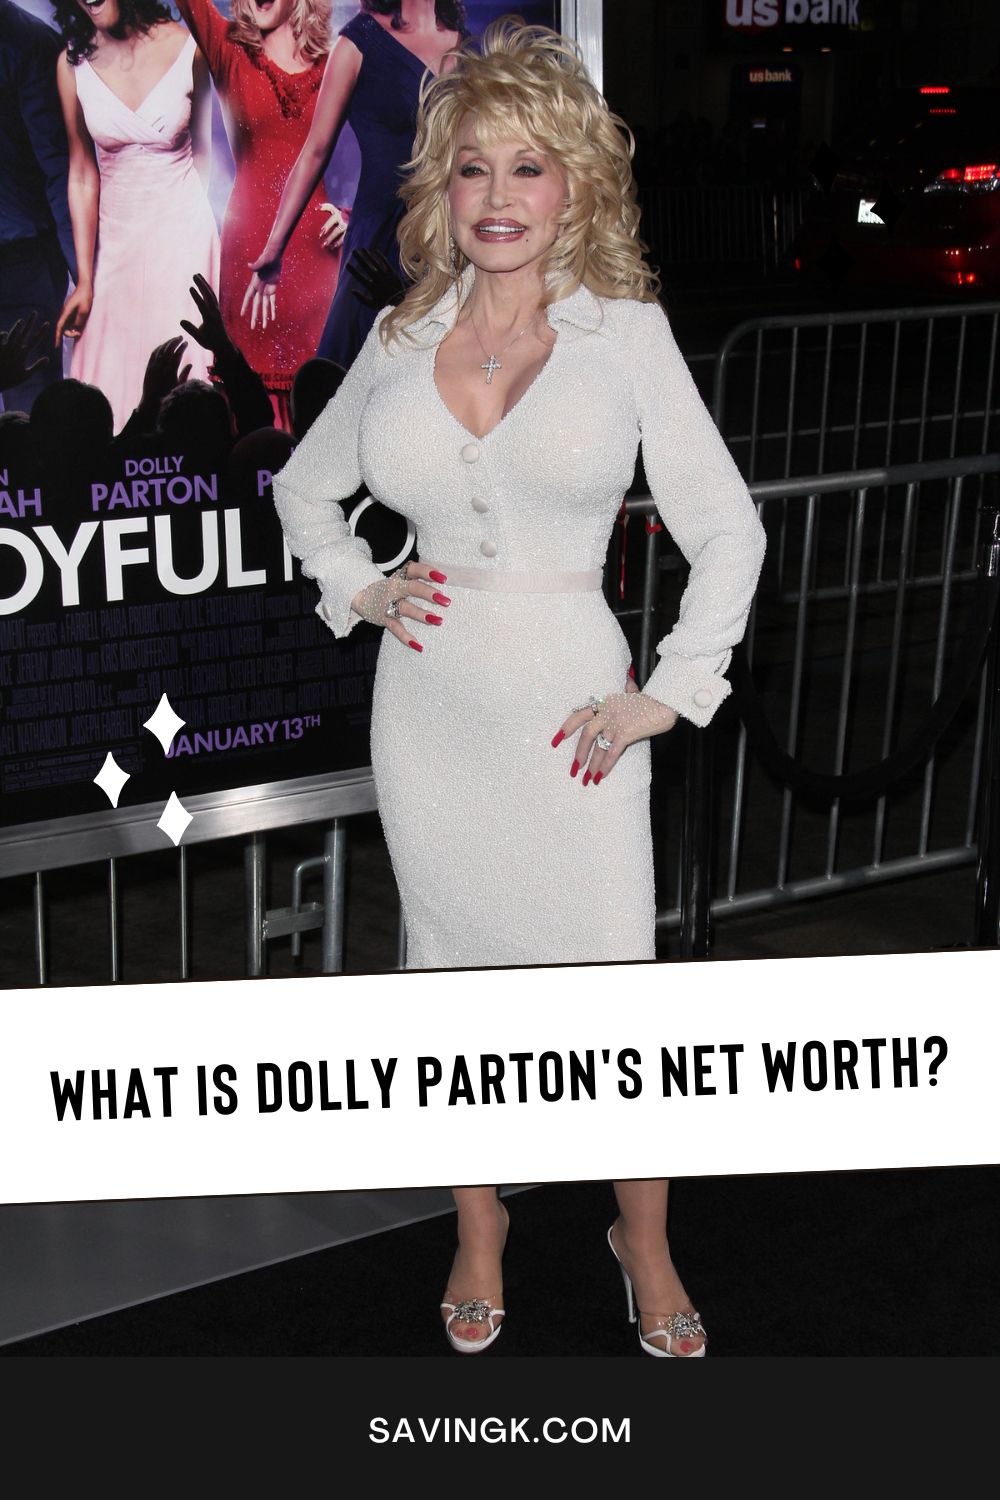 What is Dolly Parton's Net worth?